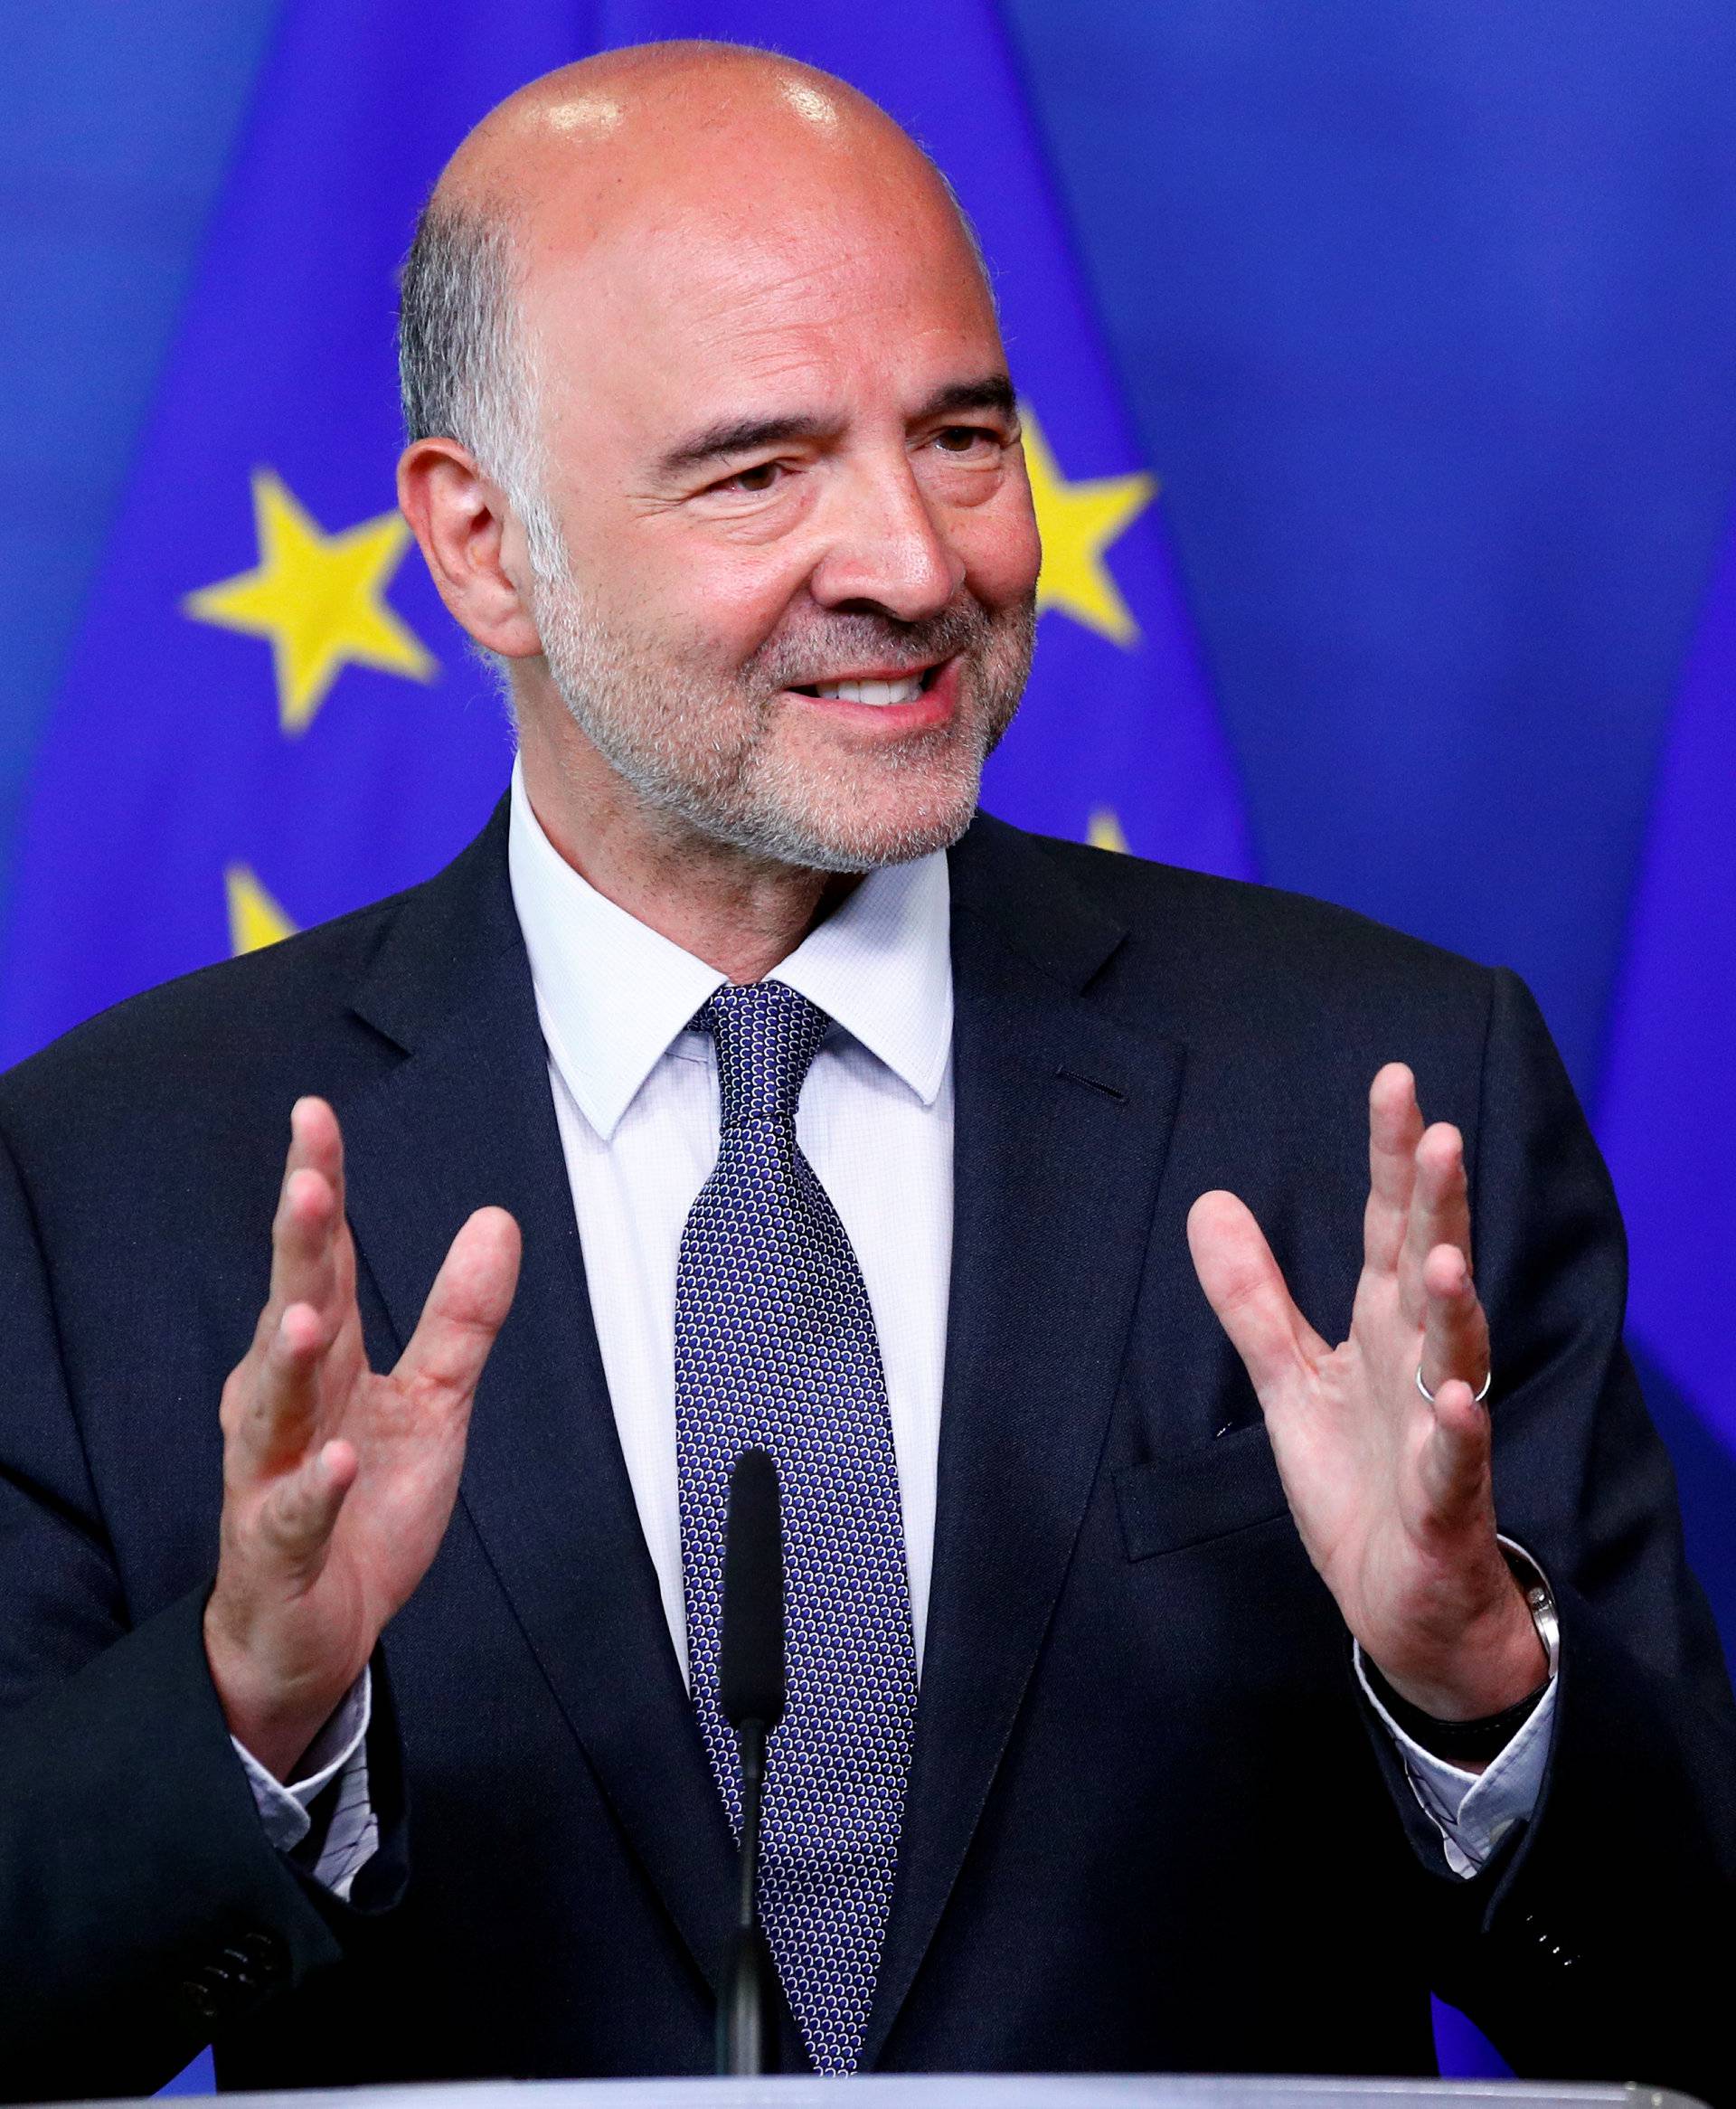 European Economic and Financial Affairs Commissioner Moscovici speaks during a news conference in Brussels